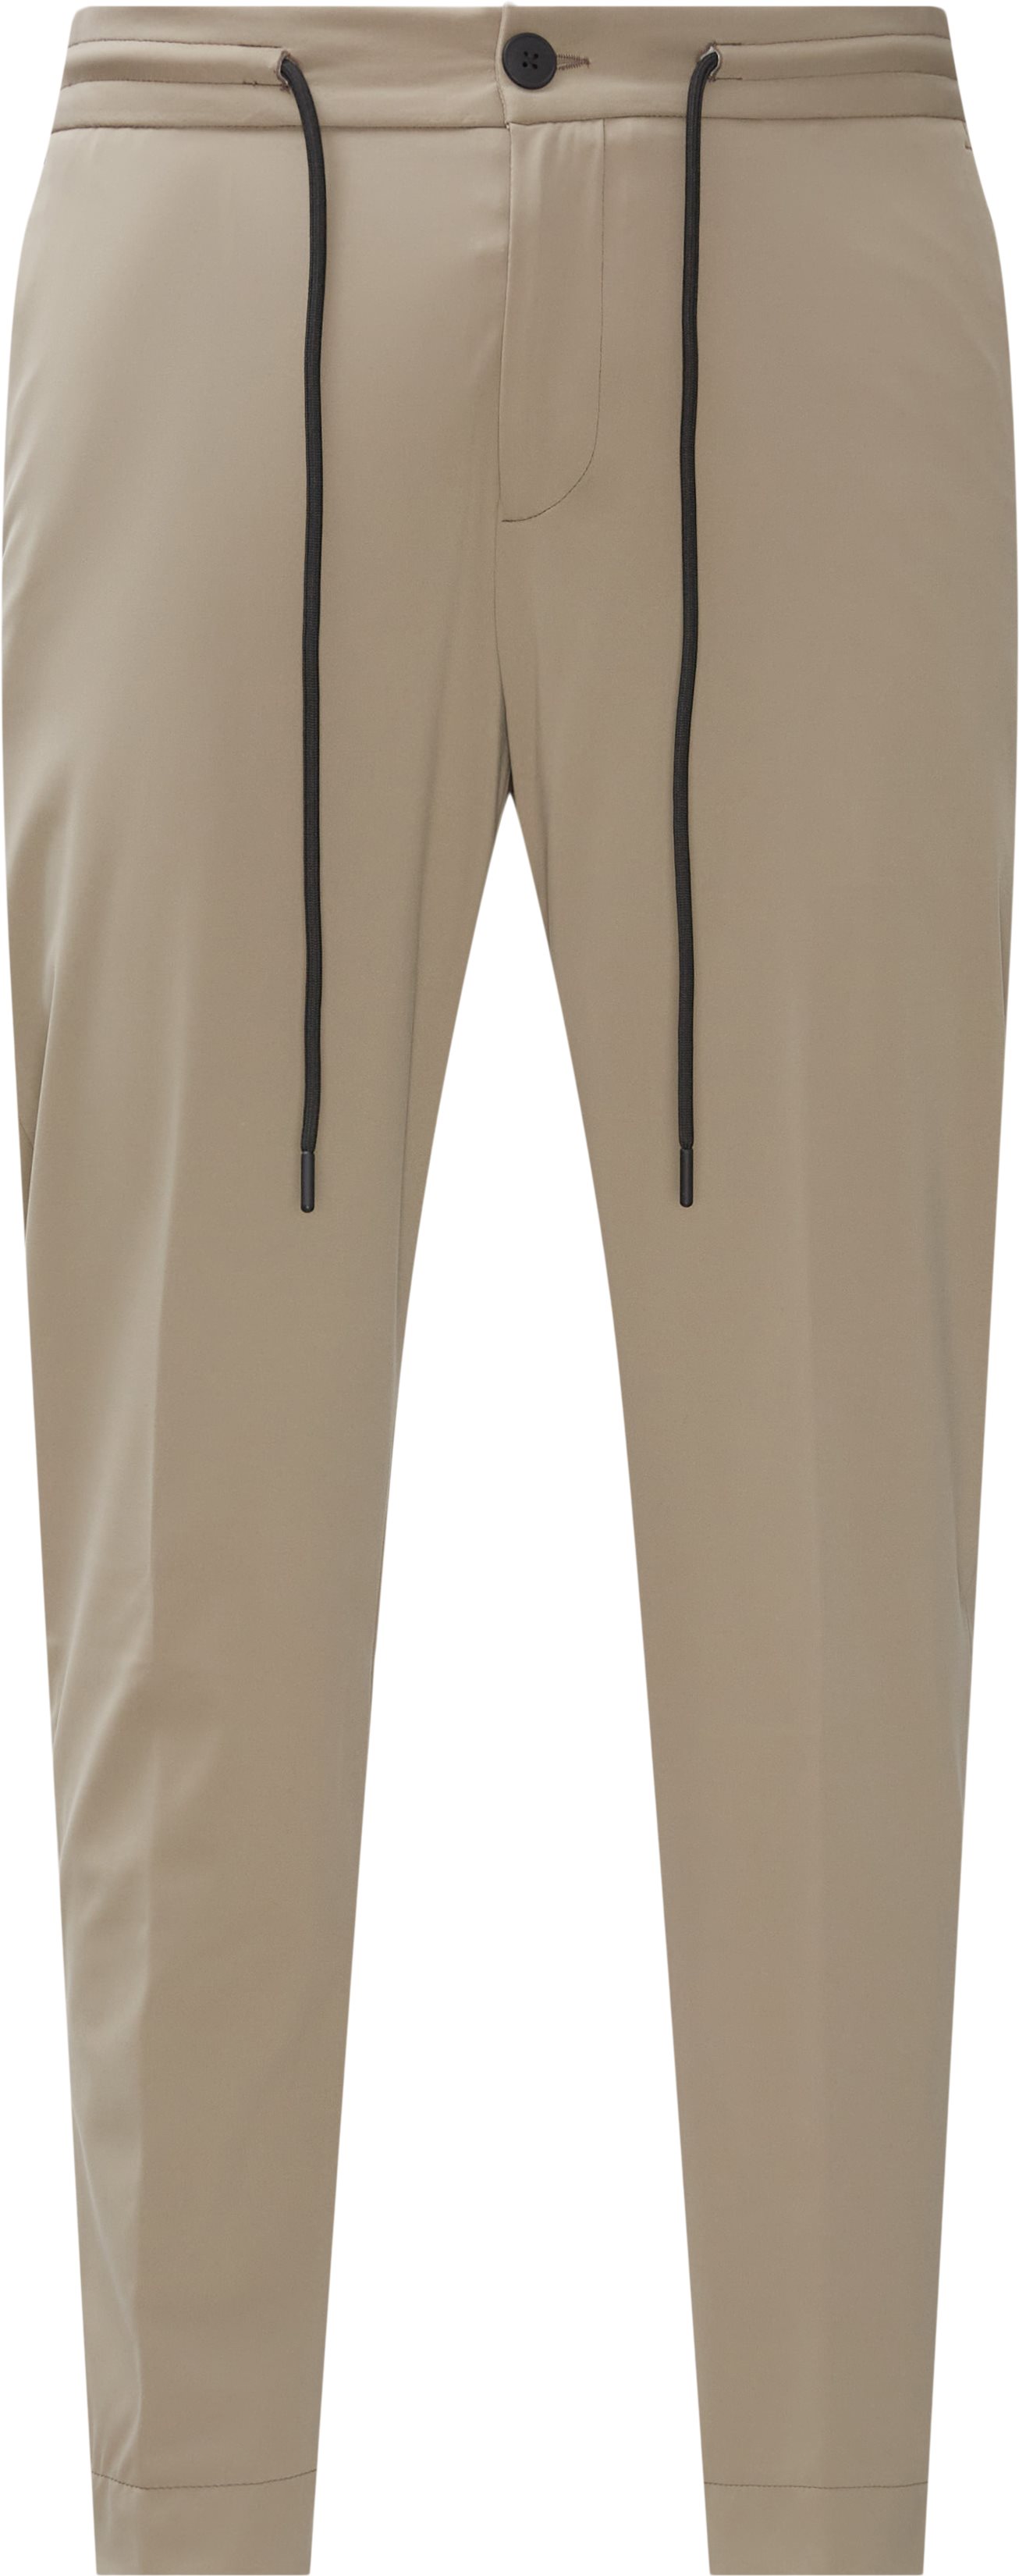 Casual Stretch Pants - Trousers - Sand